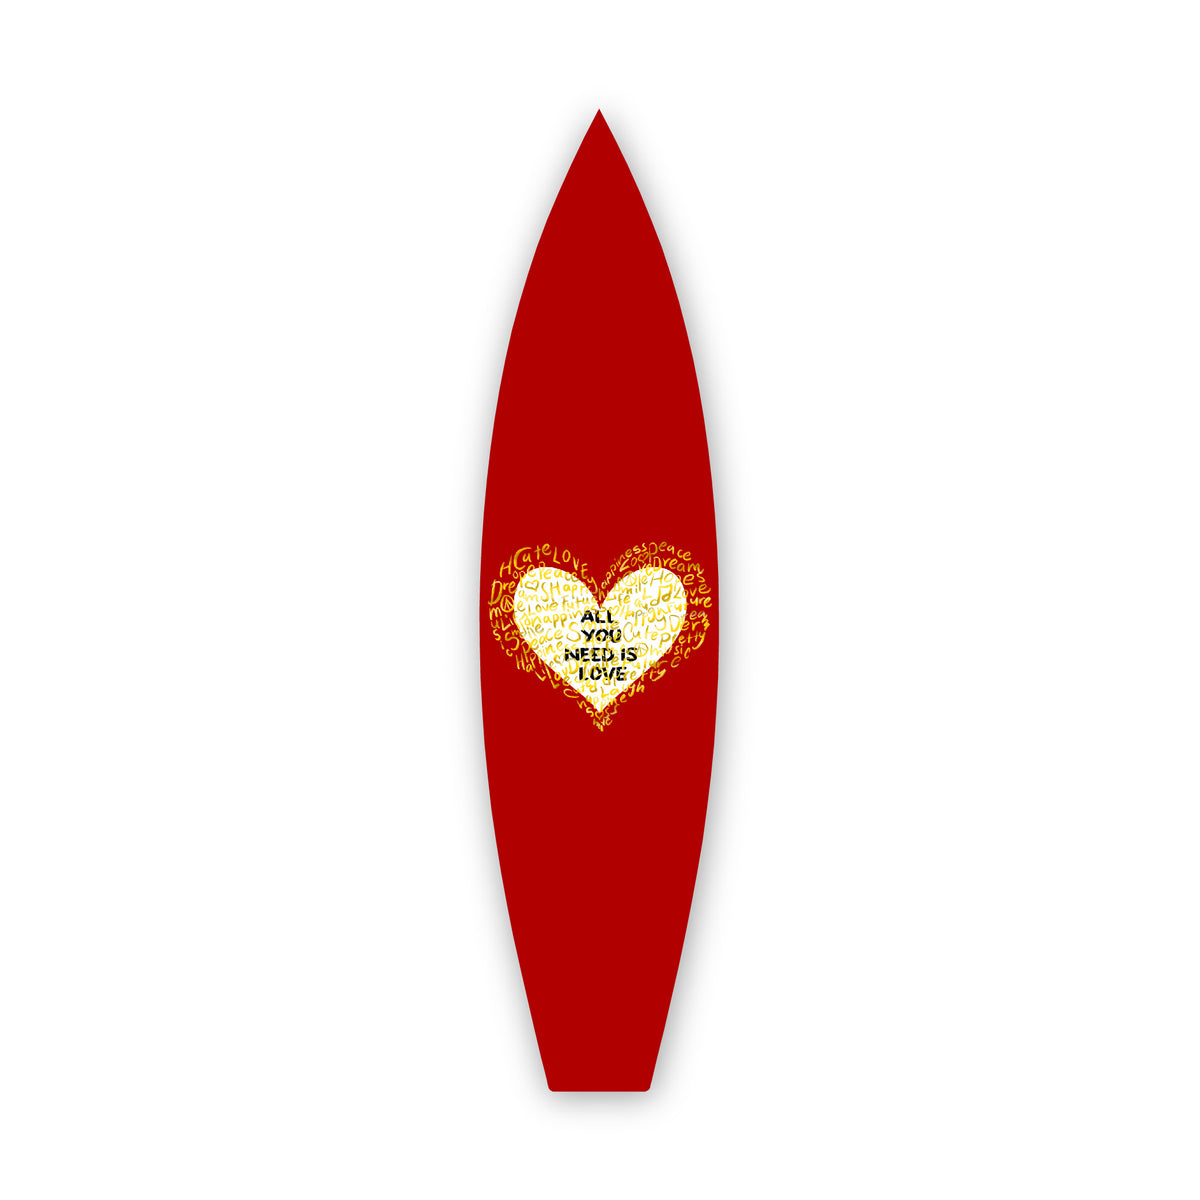 All You Need Is Love - Surfboard Art